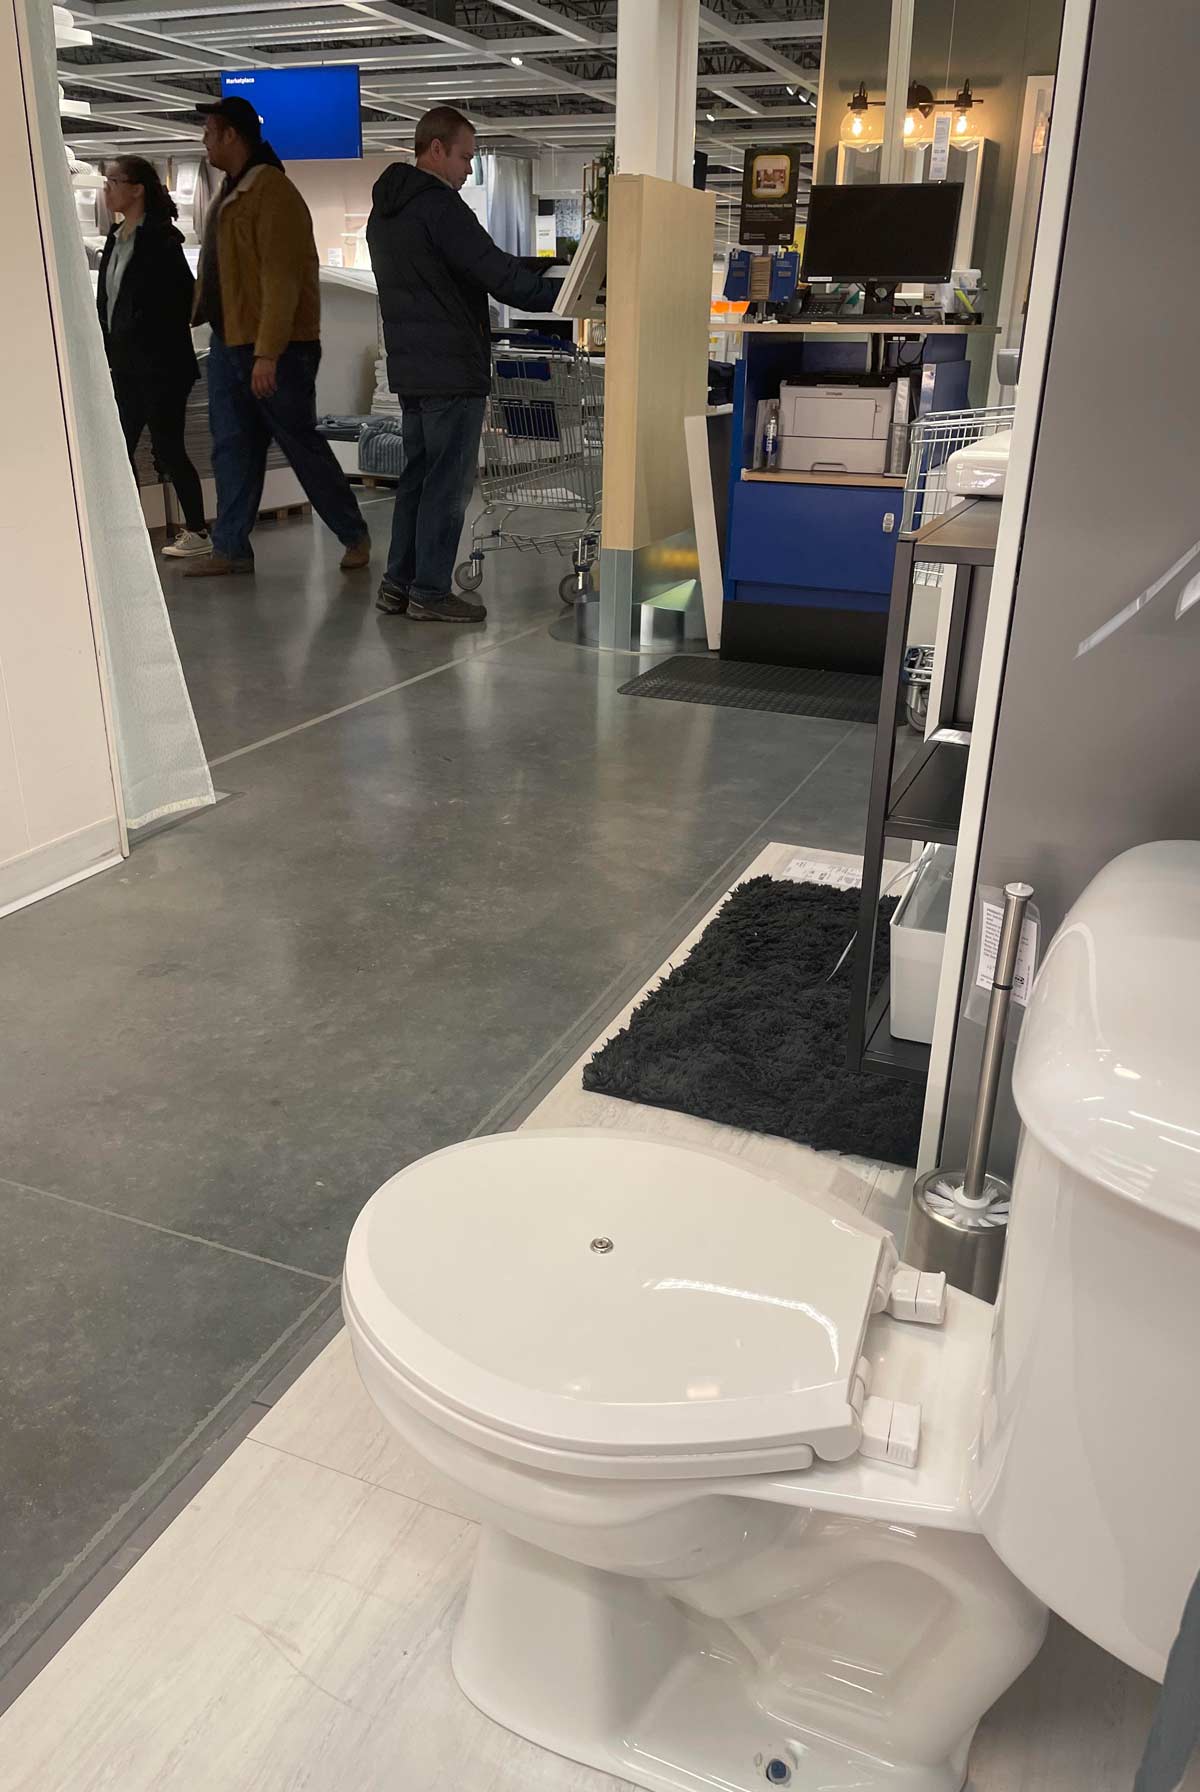 I’m at IKEA right now, and all the toilets in the bathroom displays are screwed shut so nobody can poop in them. They must’ve learned that lesson the hard way